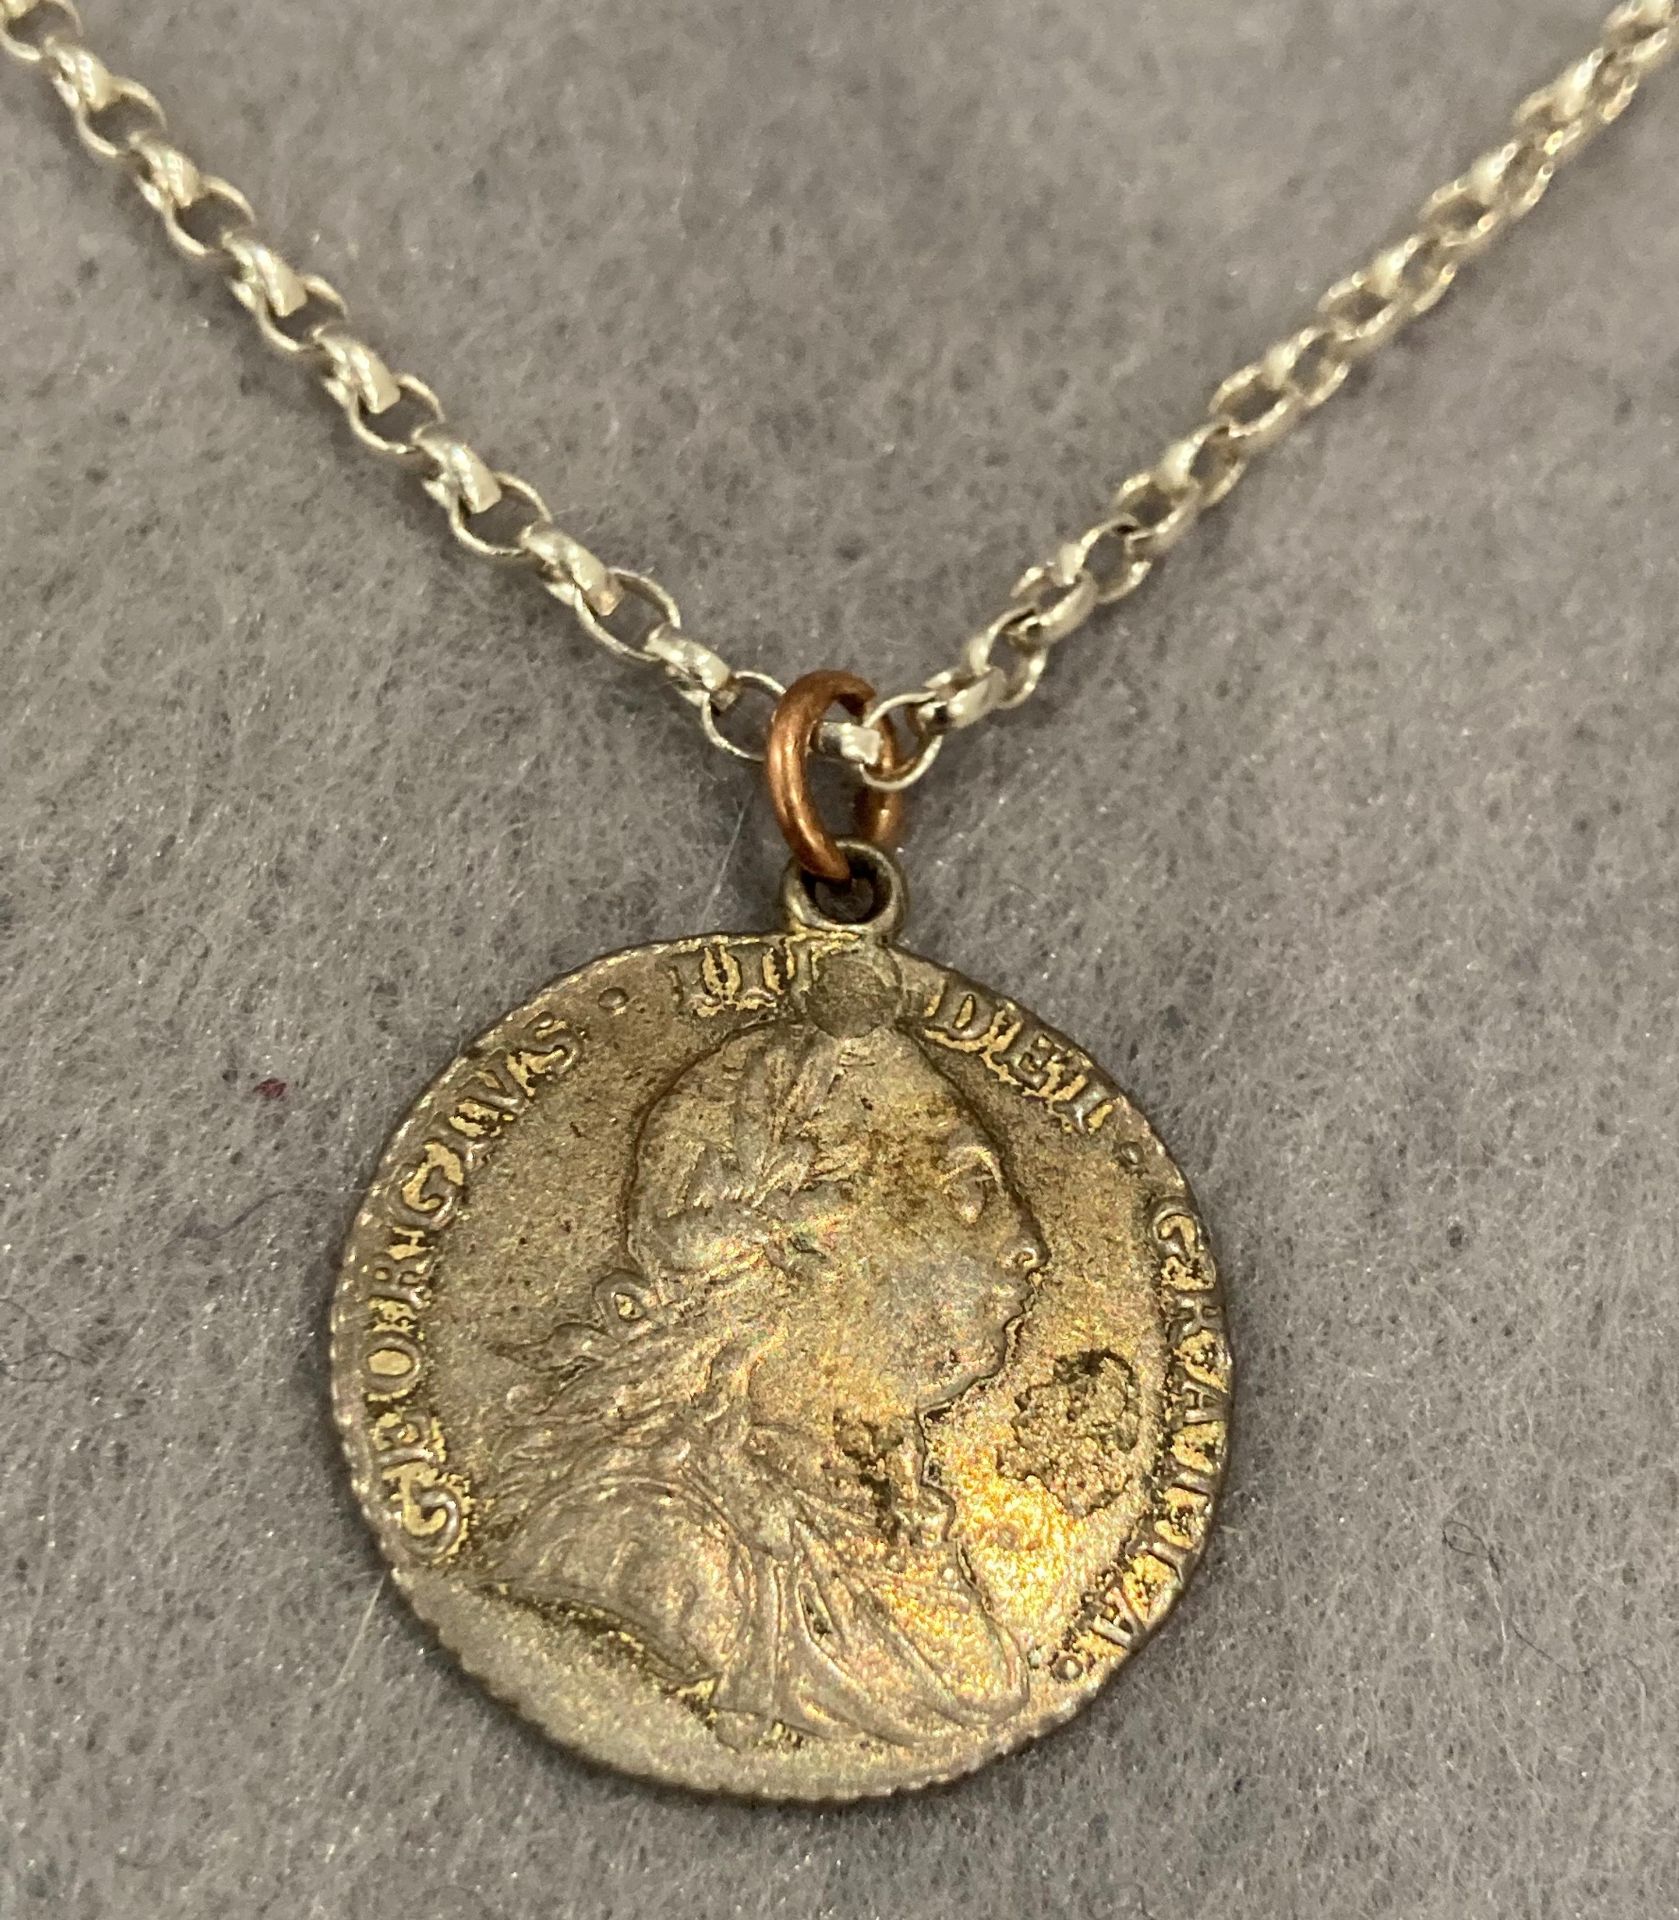 George III 1787 sixpence on sterling silver chain